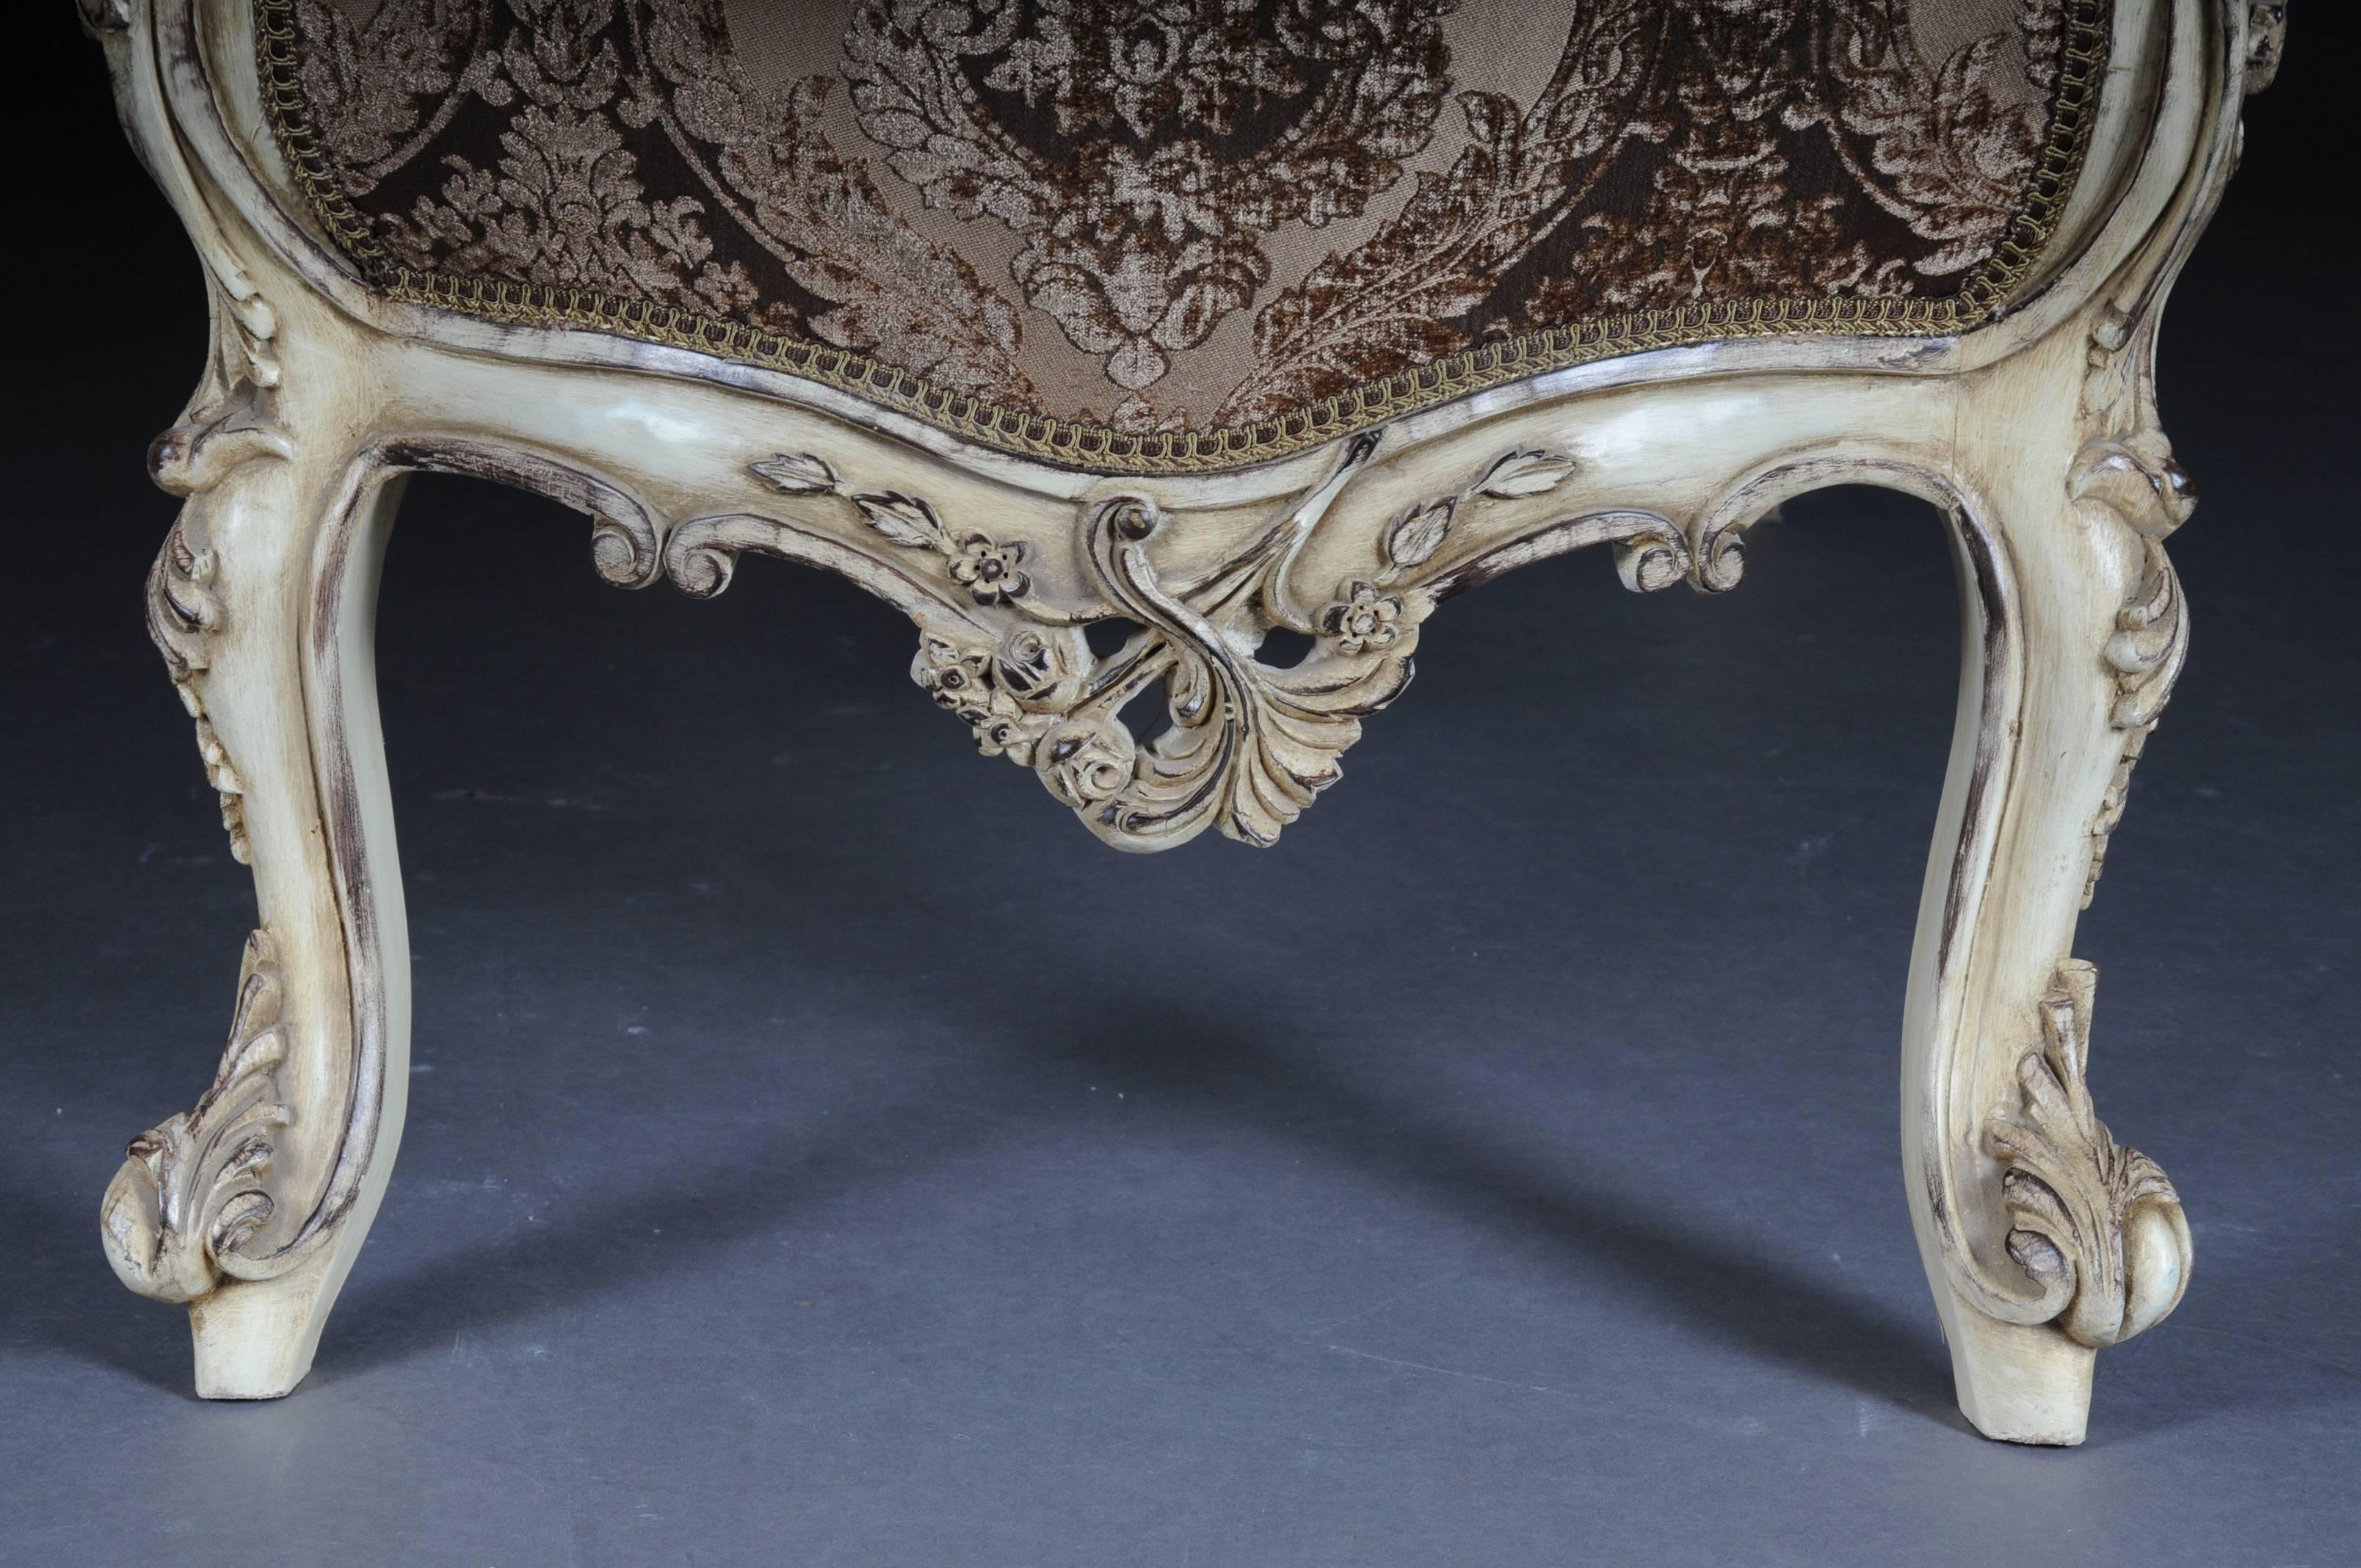 Upholstery Luxurious French Bench, Gondola in the Louis Seize XVI